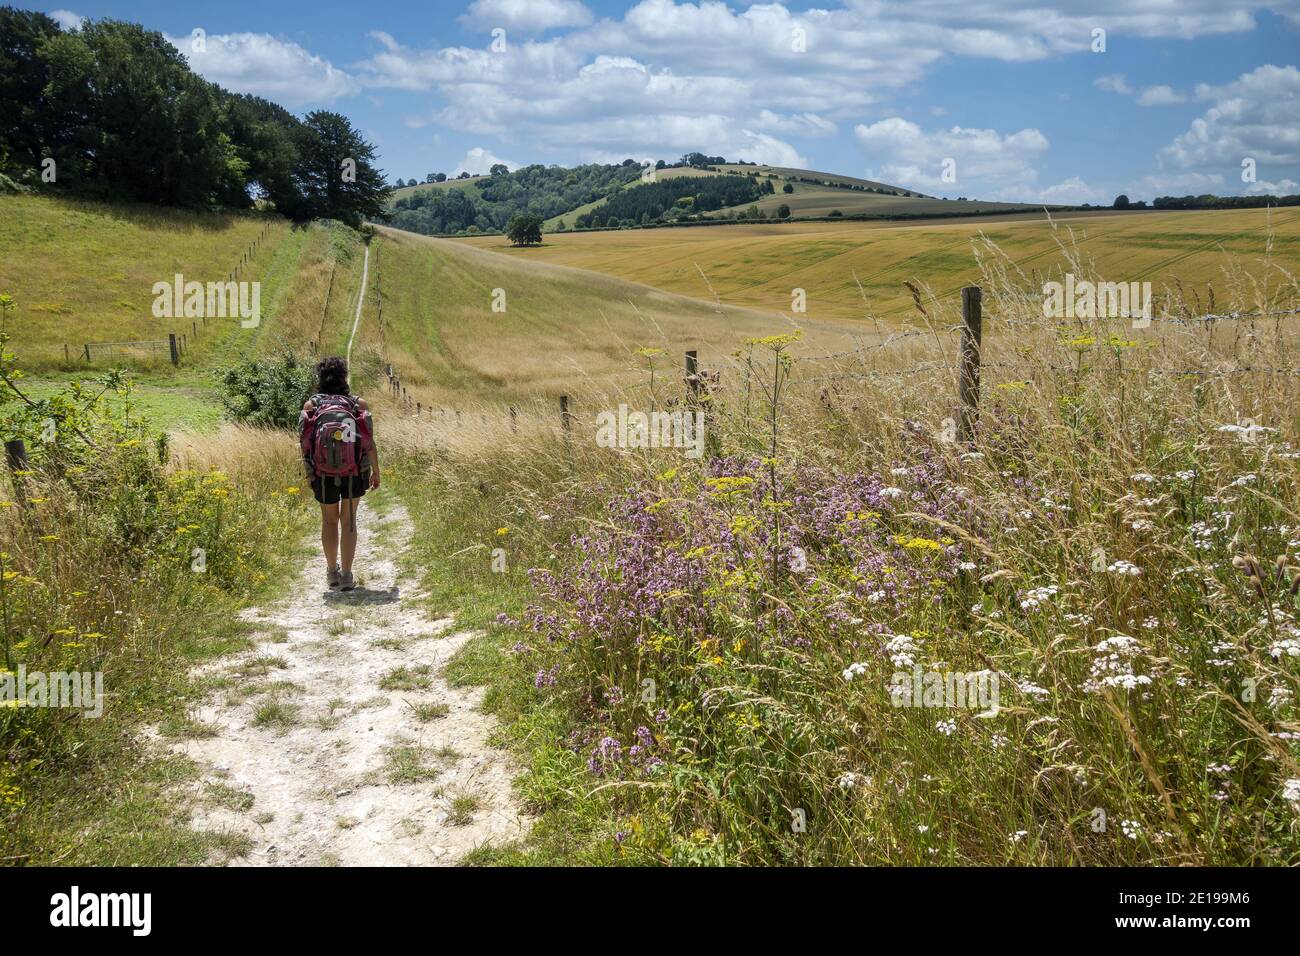 Hiker on the Hangers Way, a 21-mile-long-distance footpath through Hampshire from Alton railway station to Queen Elizabeth Country Park, England, UK Stock Photo